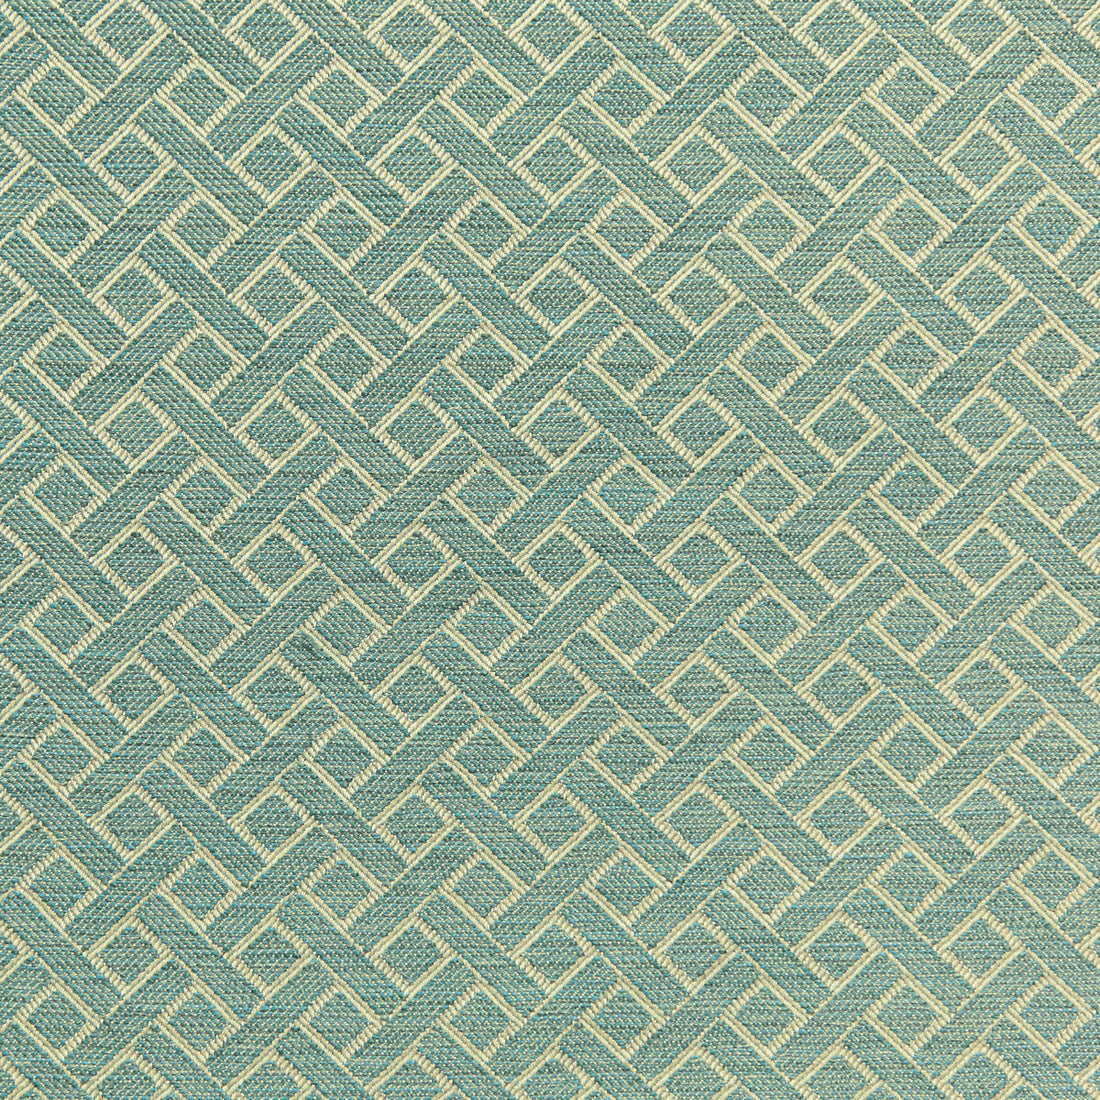 Maldon Weave fabric in lake color - pattern 2020102.313.0 - by Lee Jofa in the Linford Weaves collection